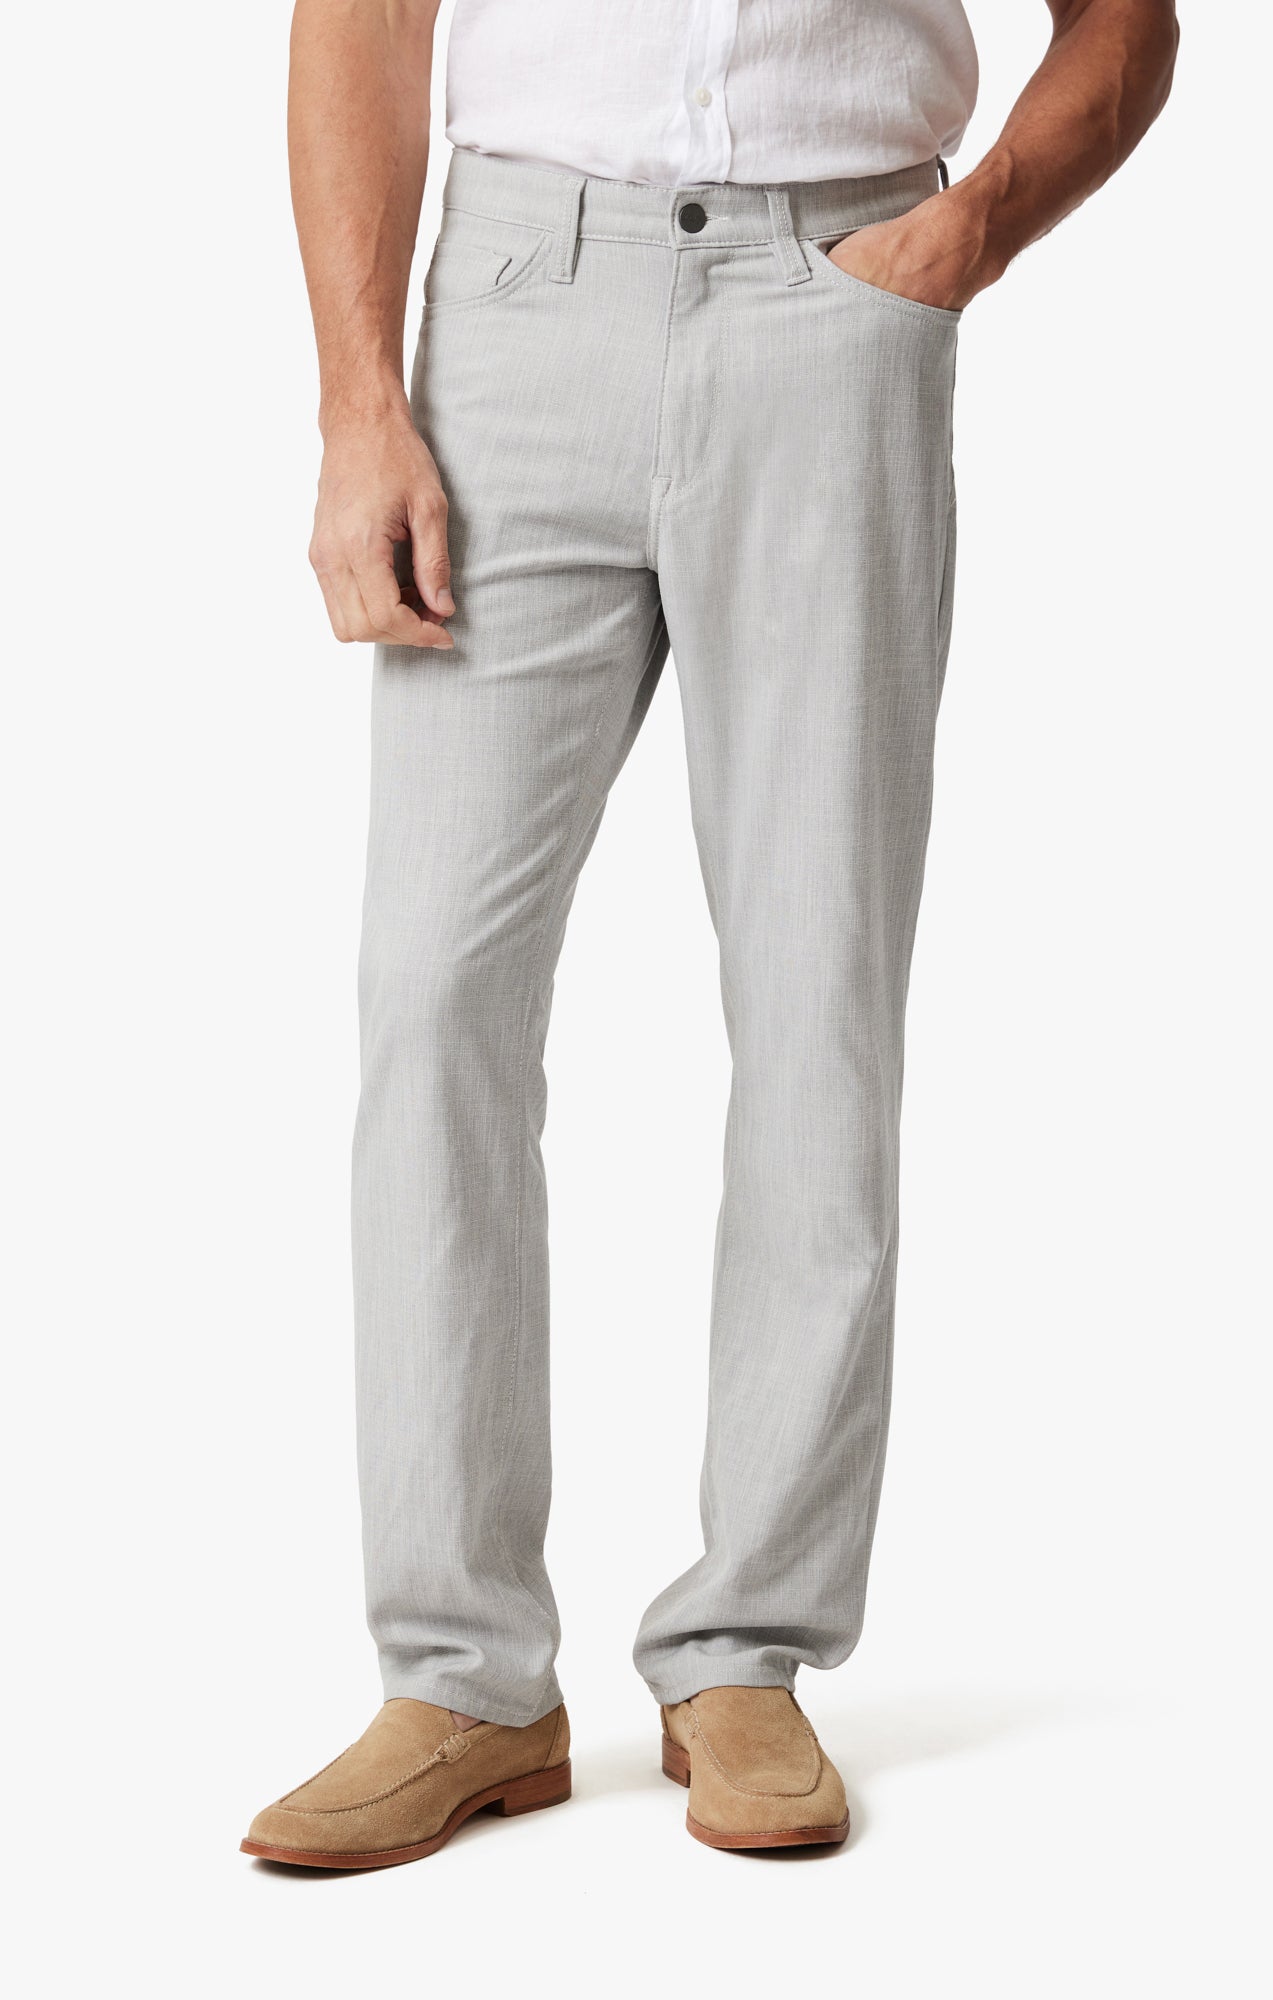 Charisma Relaxed Straight Pants in Bone Cross Twill